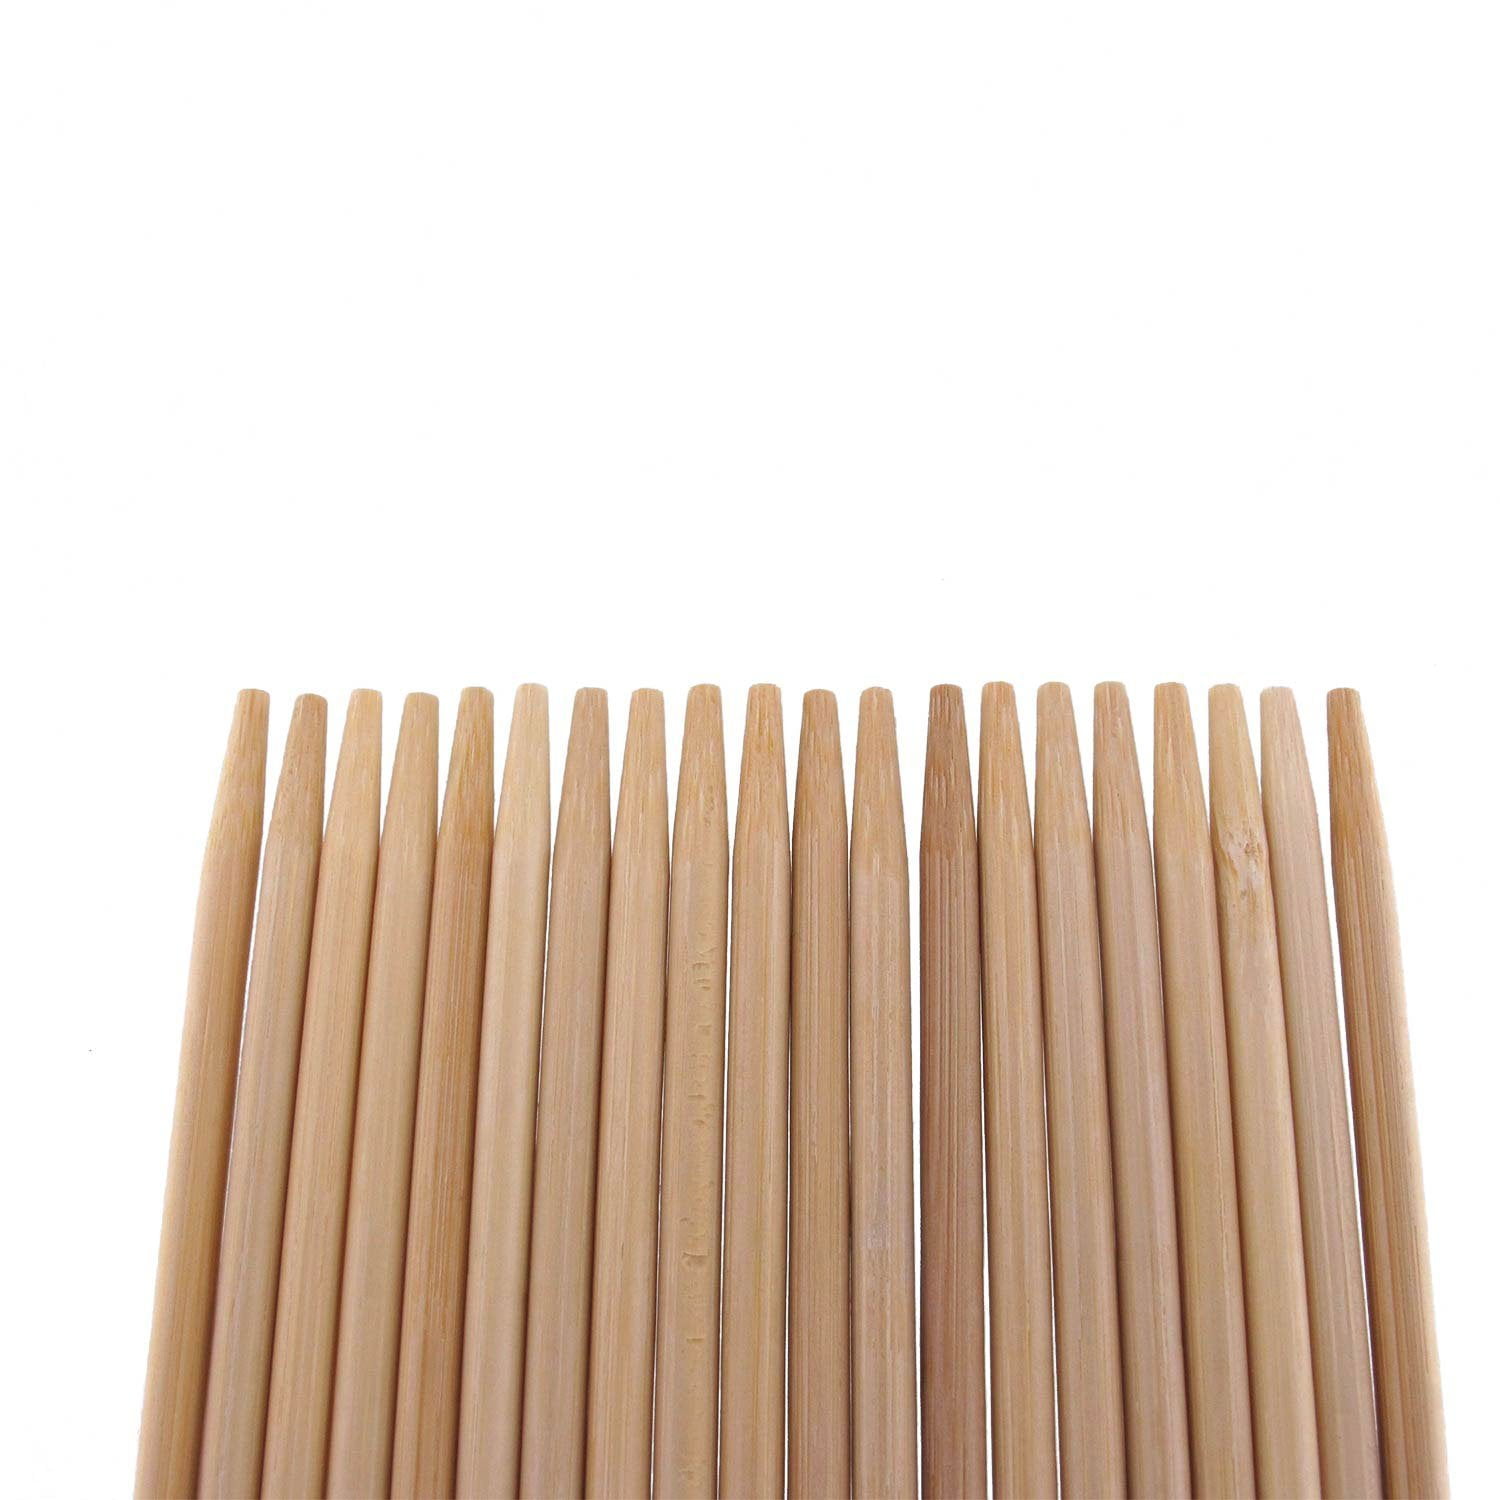 BLUE TOP Bamboo Marshmallow Grilling Sticks Smores Skewers 19.7 Inch 5mm Thick 60 PCS Extra Long Heavy DutyWooden Skewer BBQ Hot Dog Skewer,Great for Camping,Parties,Weddings and Plant Stakes. 